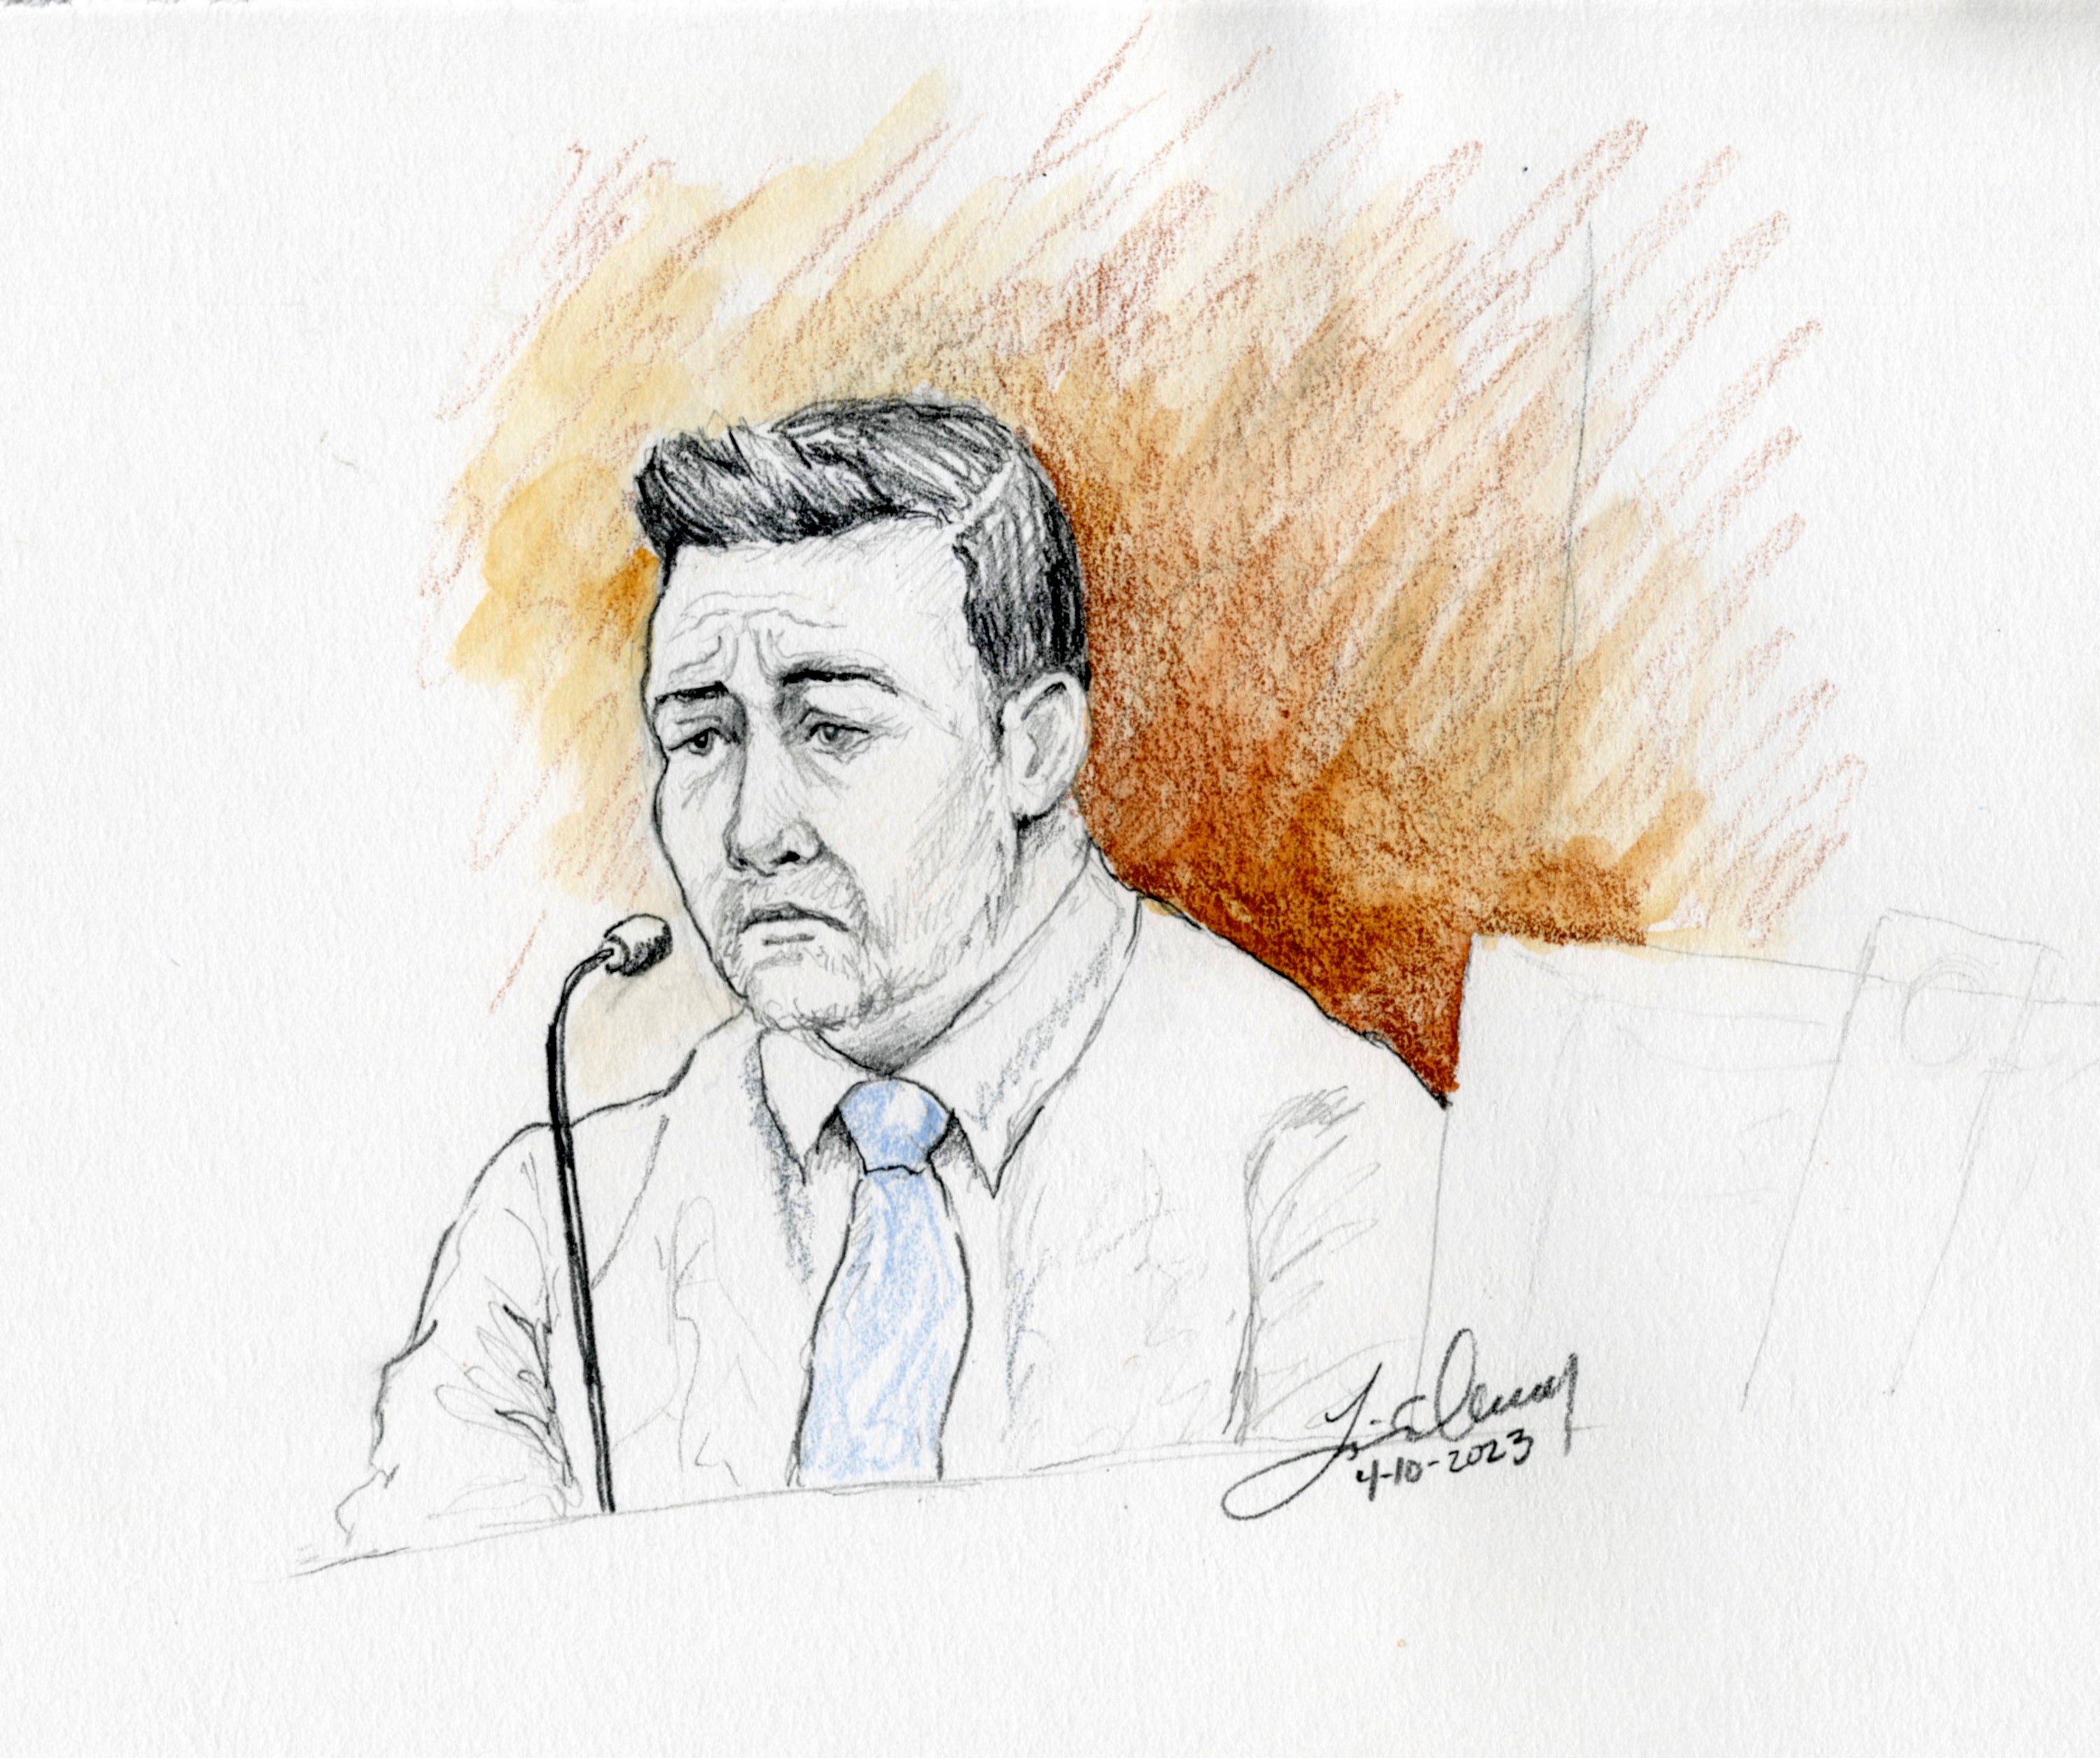 This courtroom sketch depicts Brandon Boudreaux, who was previously married to Lori Vallow Daybell's niece, testifying during Vallow Daybell's murder trial in Boise, Idaho